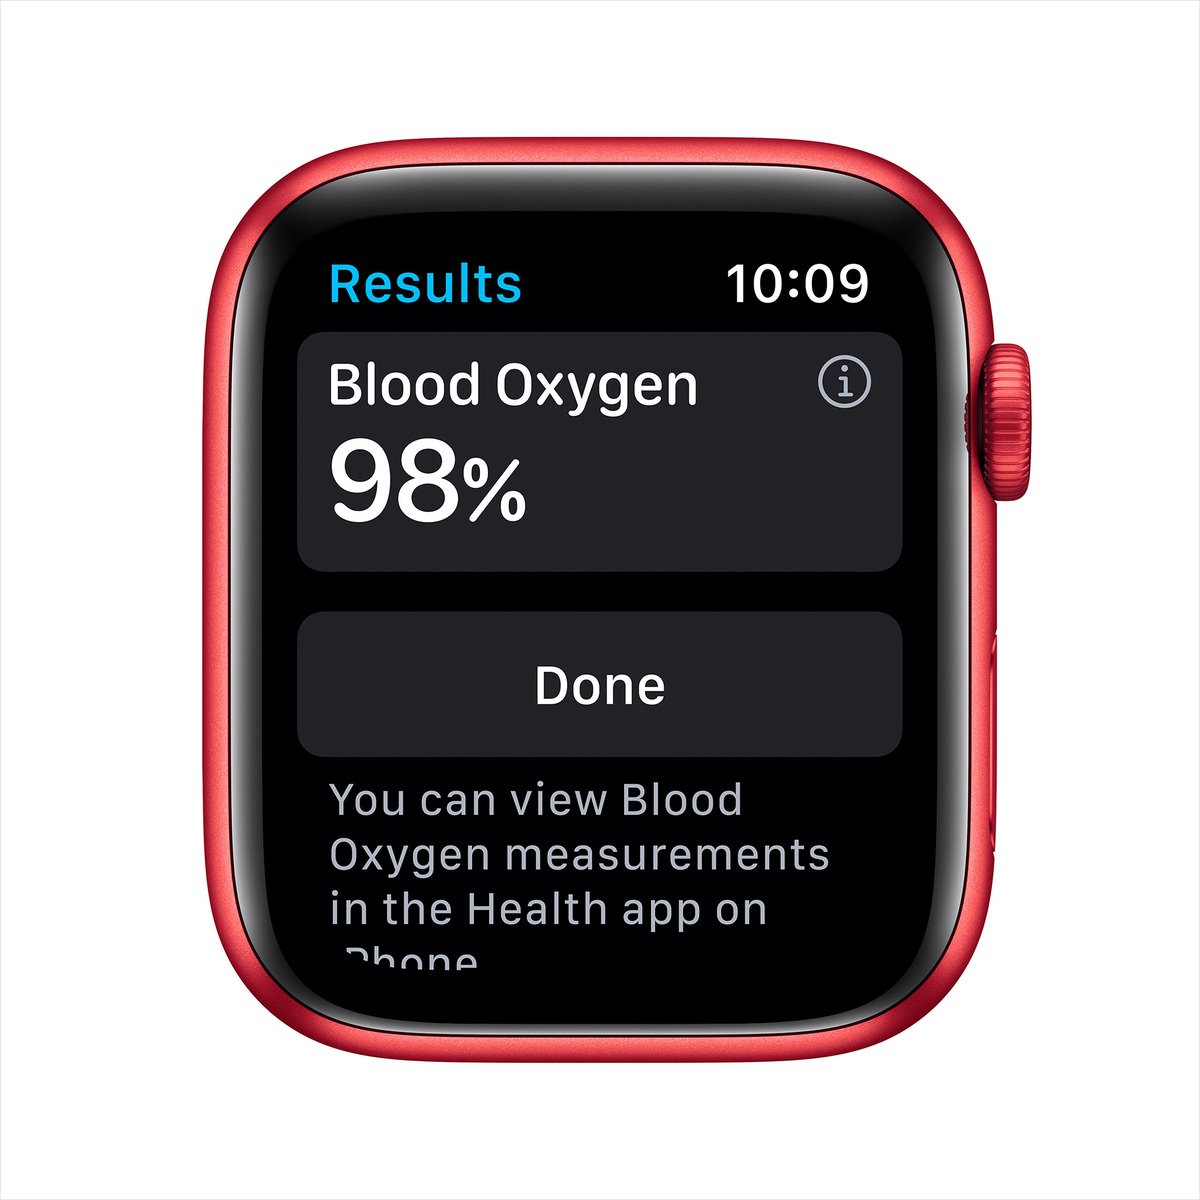 Apple Watch Series 9 - 41mm - GPS + Cellular - (PRODUCT)RED Aluminum Case - (PRODUCT)RED Sport Band - M/L